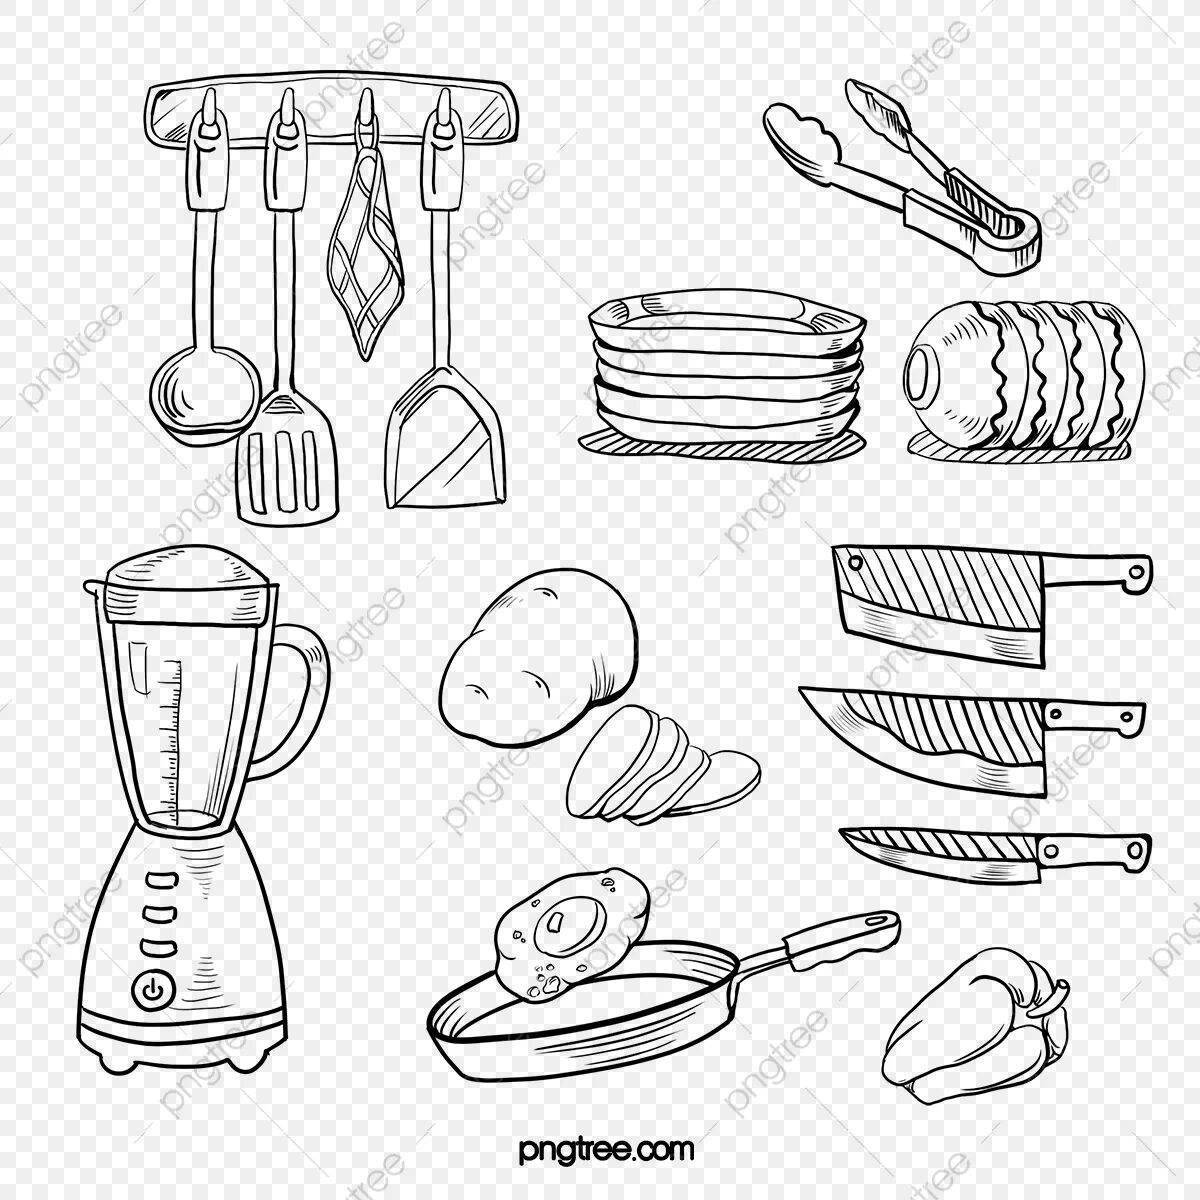 Exquisite kitchen utensils coloring for kids